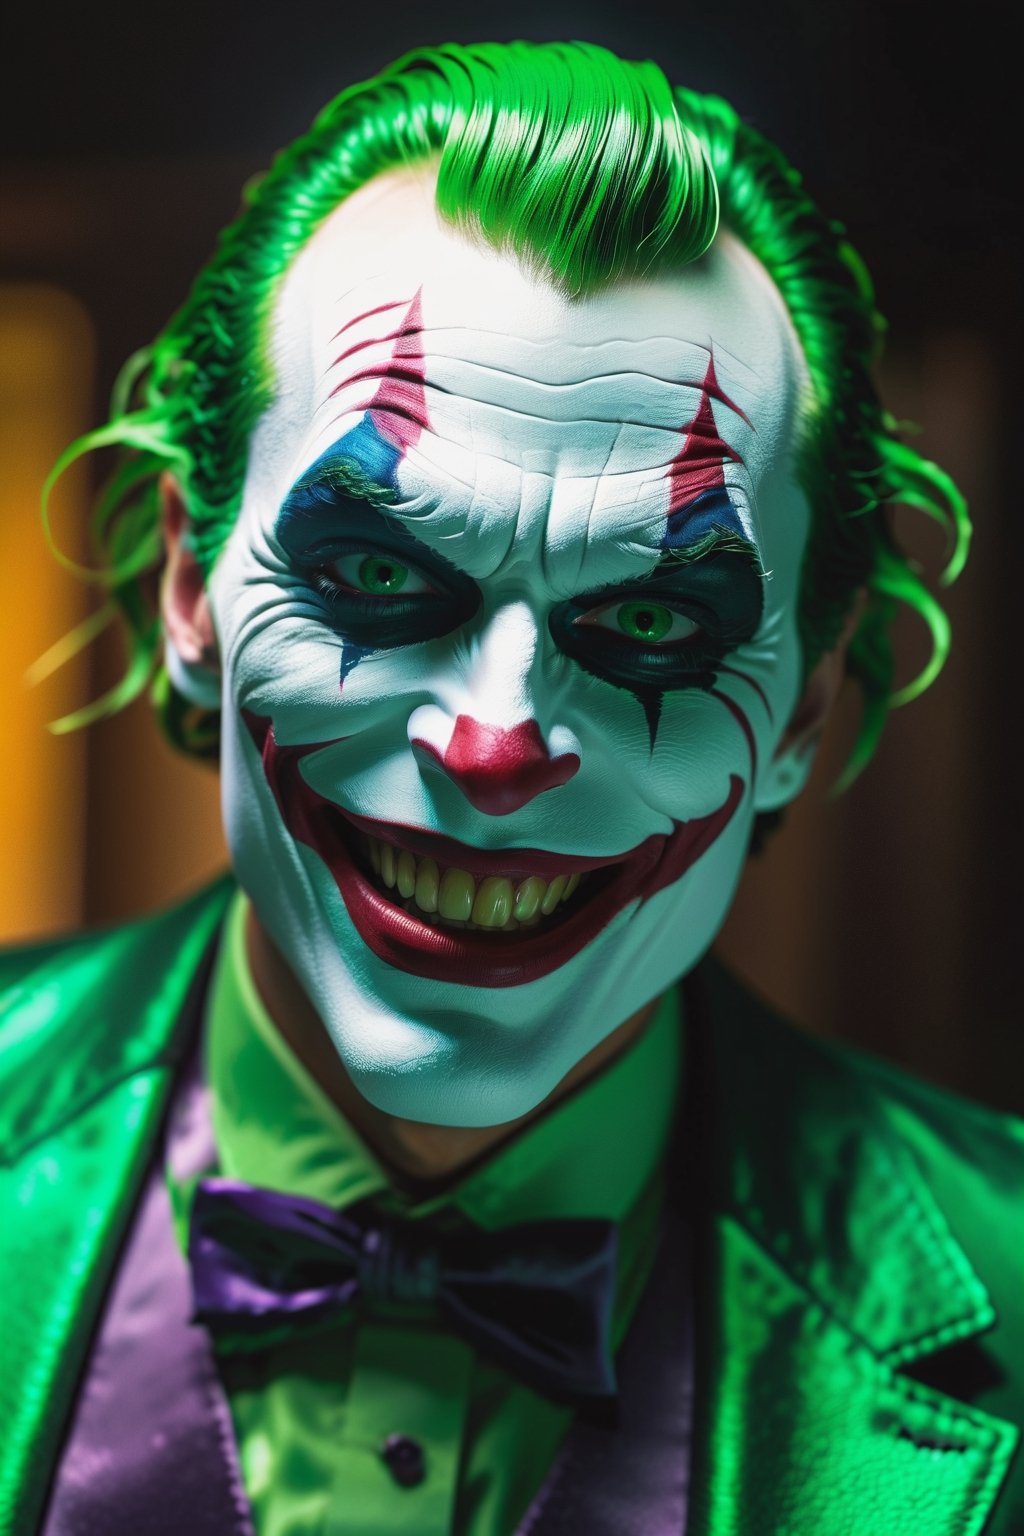 The Dark Joker with Green Evil Light eyes and lighting green thunder Dc , scary, Classic Academia, Flexography, ultra wide-angle, Game engine rendering, Grainy, Collage, analogous colors, Meatcore, infrared lighting, Super detailed, photorealistic, food photography, Cycles render, 4k, dance joke prank laugh,Leonardo style ,cinematic  moviemaker style